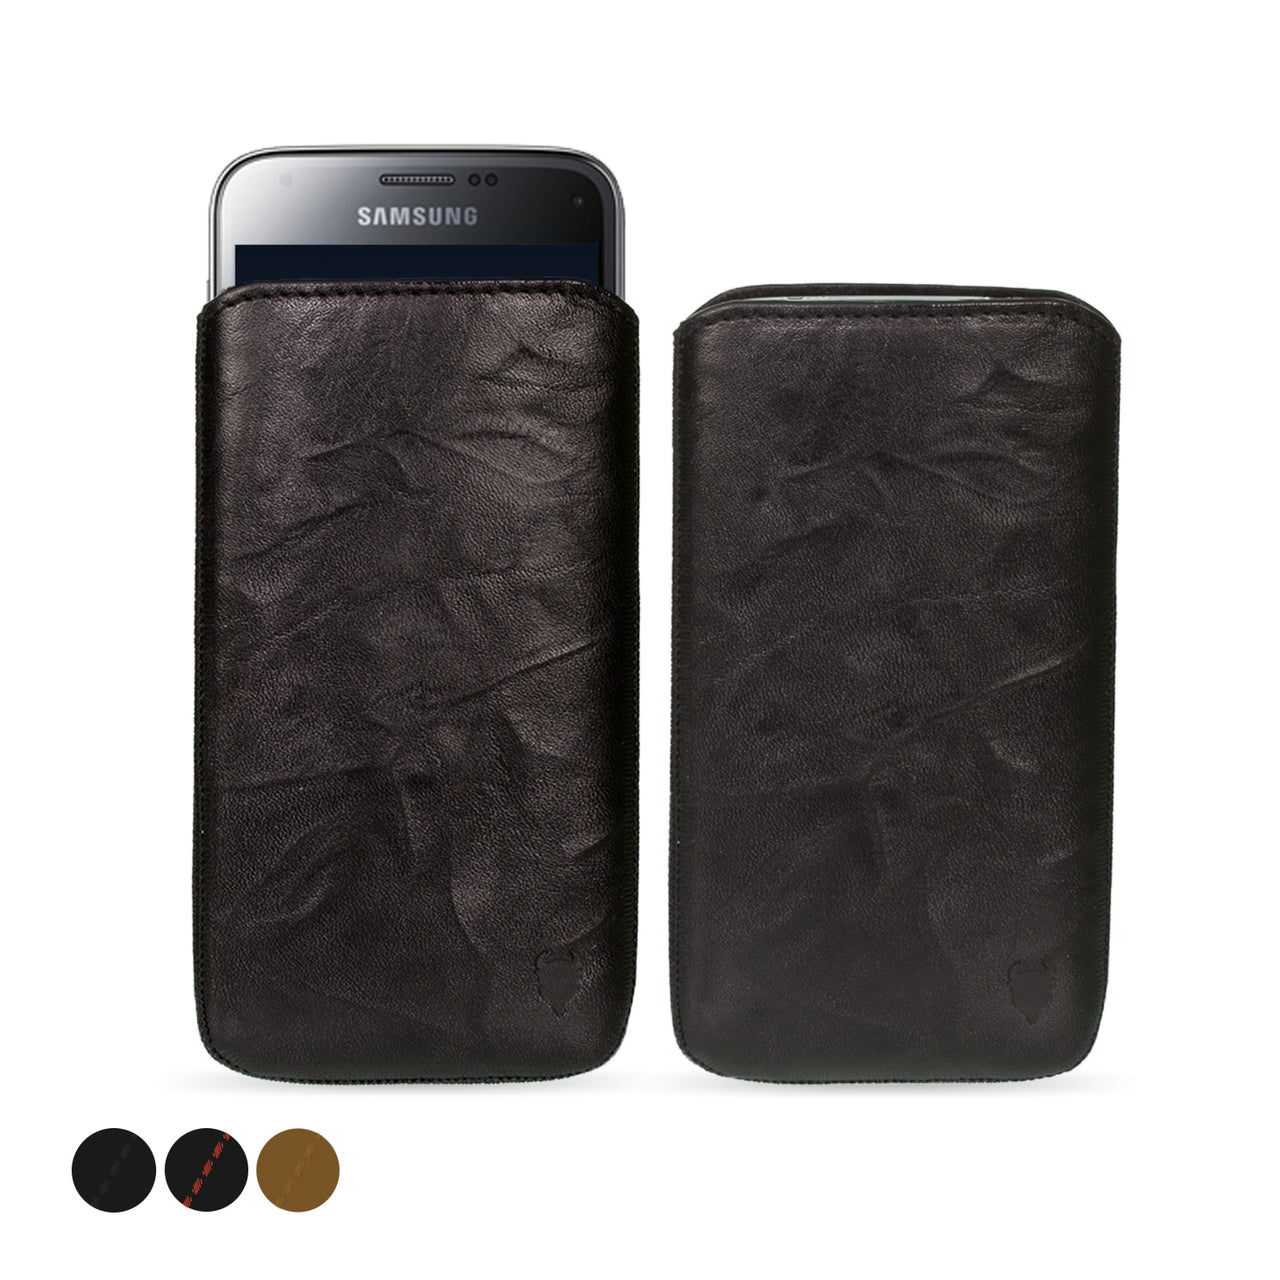 Samsung Galaxy S5 Mini Genuine Leather Pouch Sleeve Case | Artisanpouch